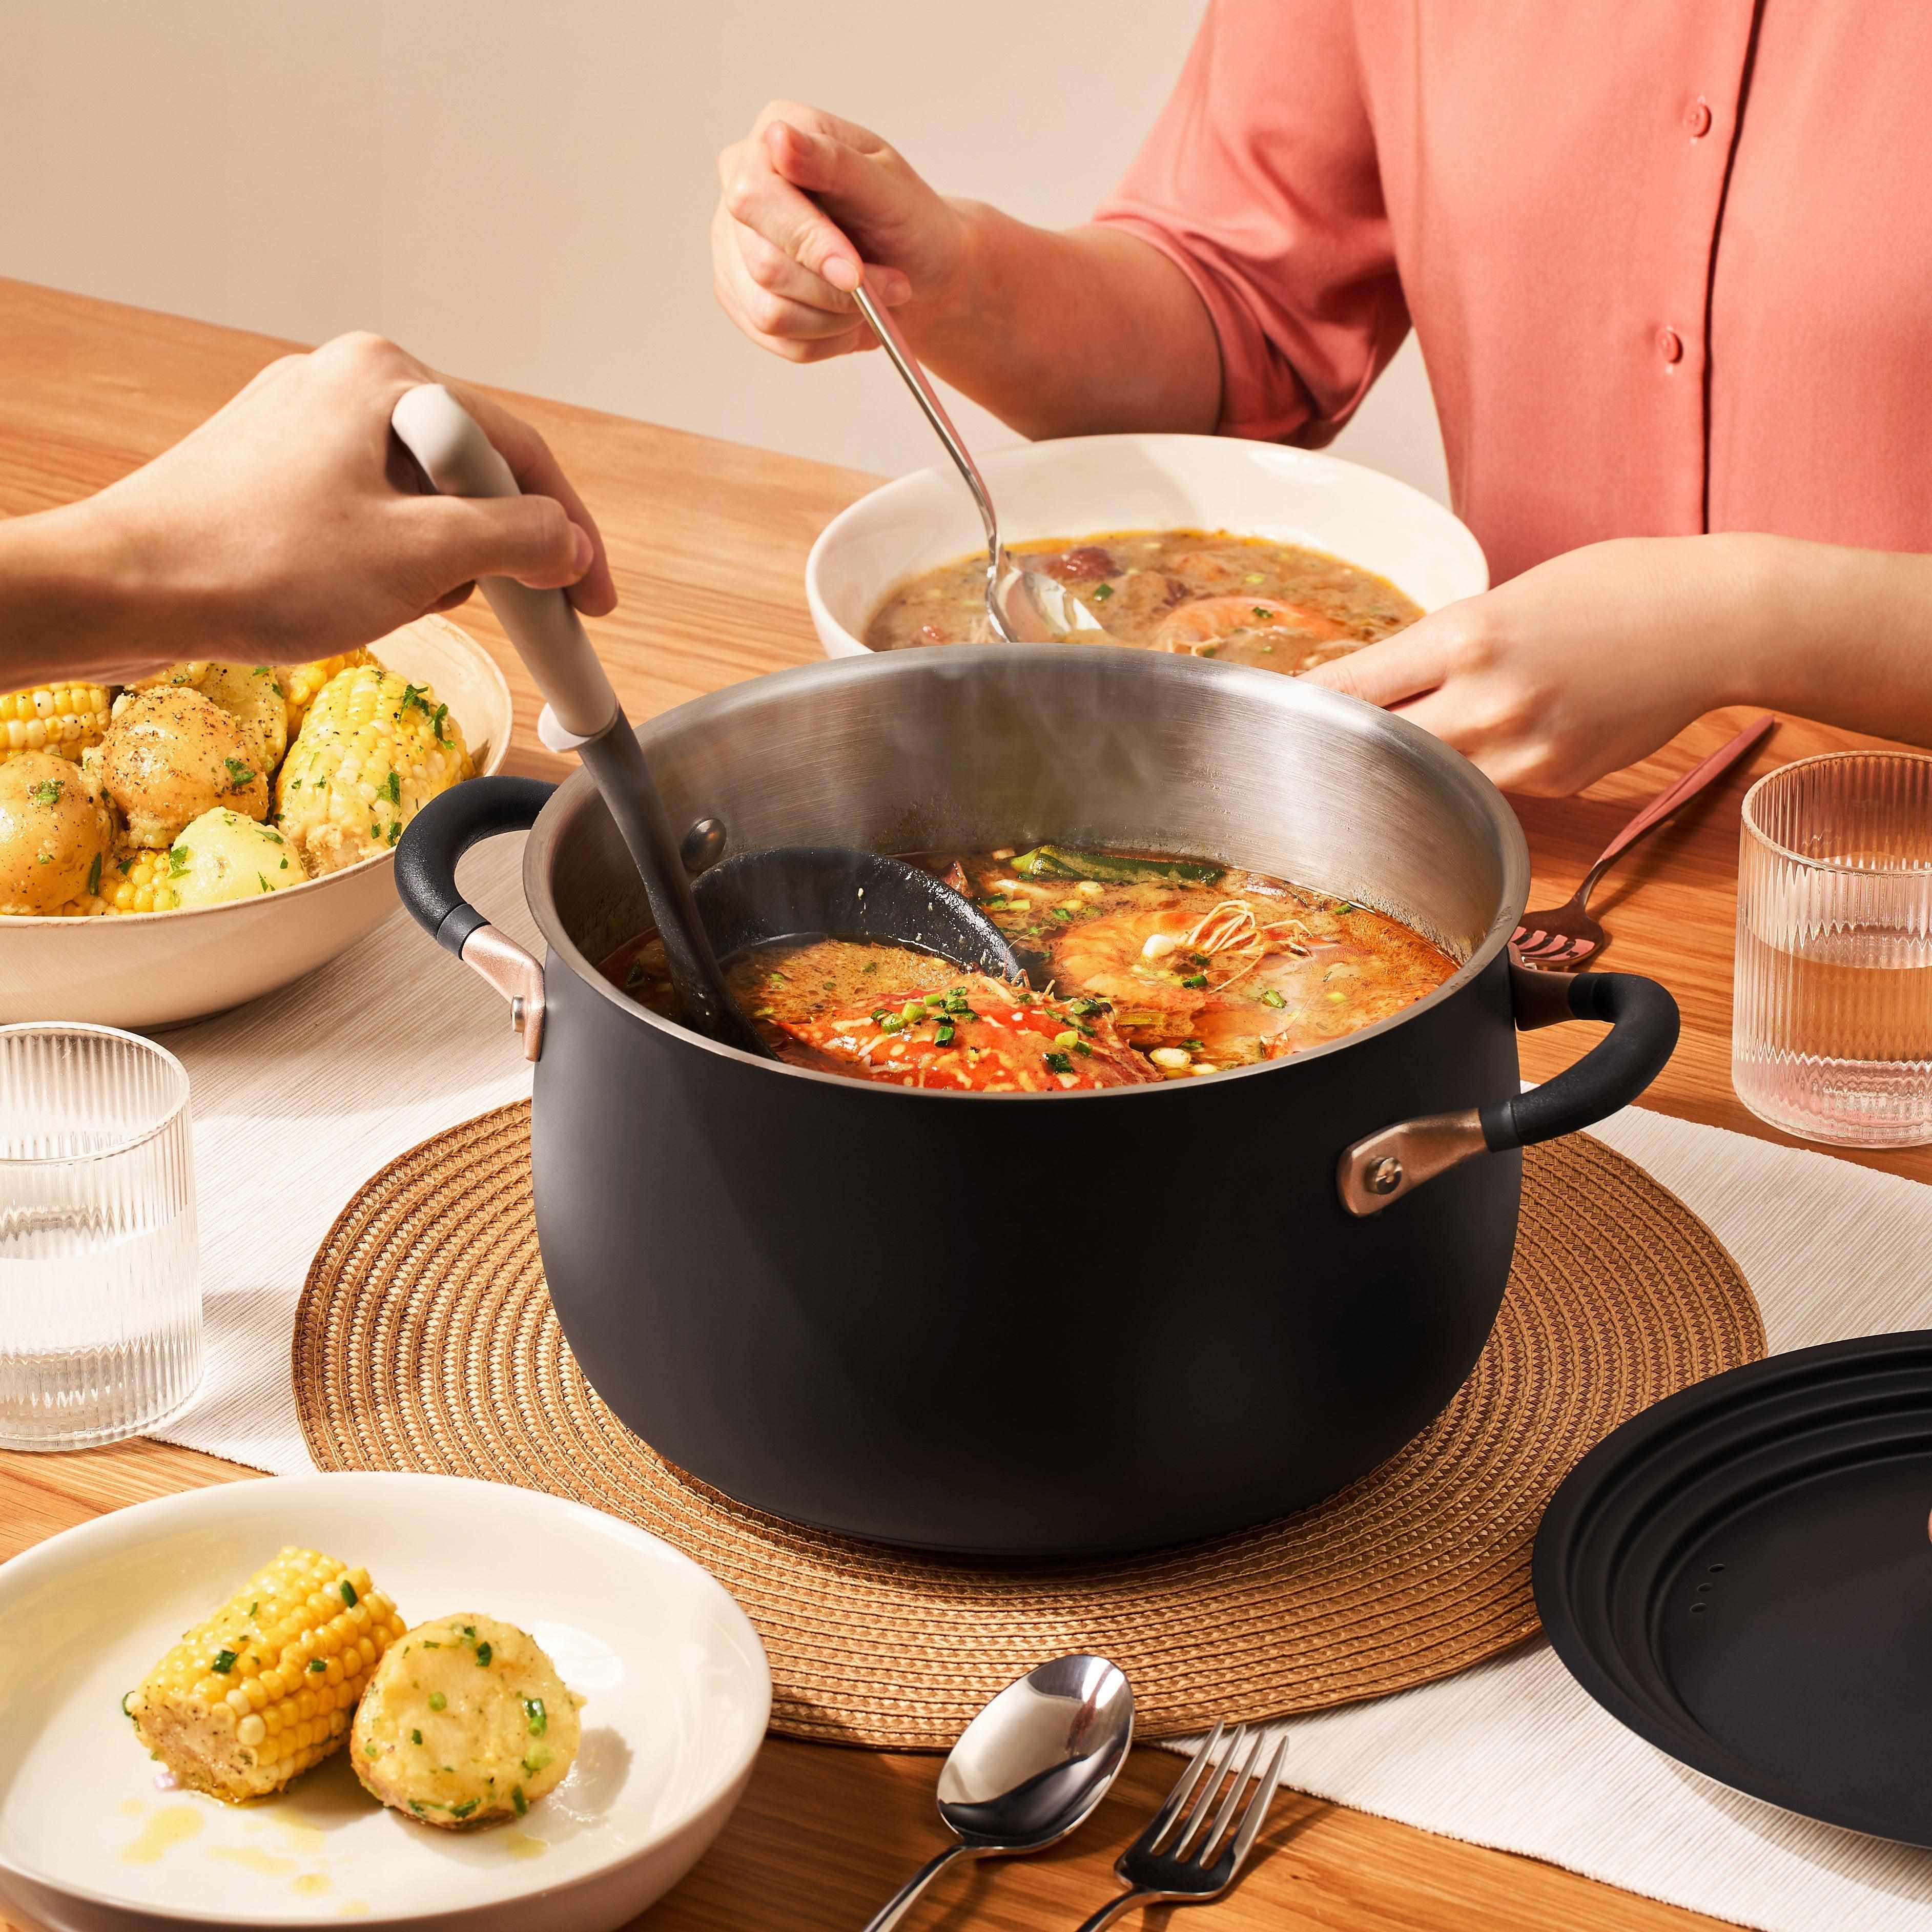 Things to know before buying Meyer cookware — FORBABYNMOMMY